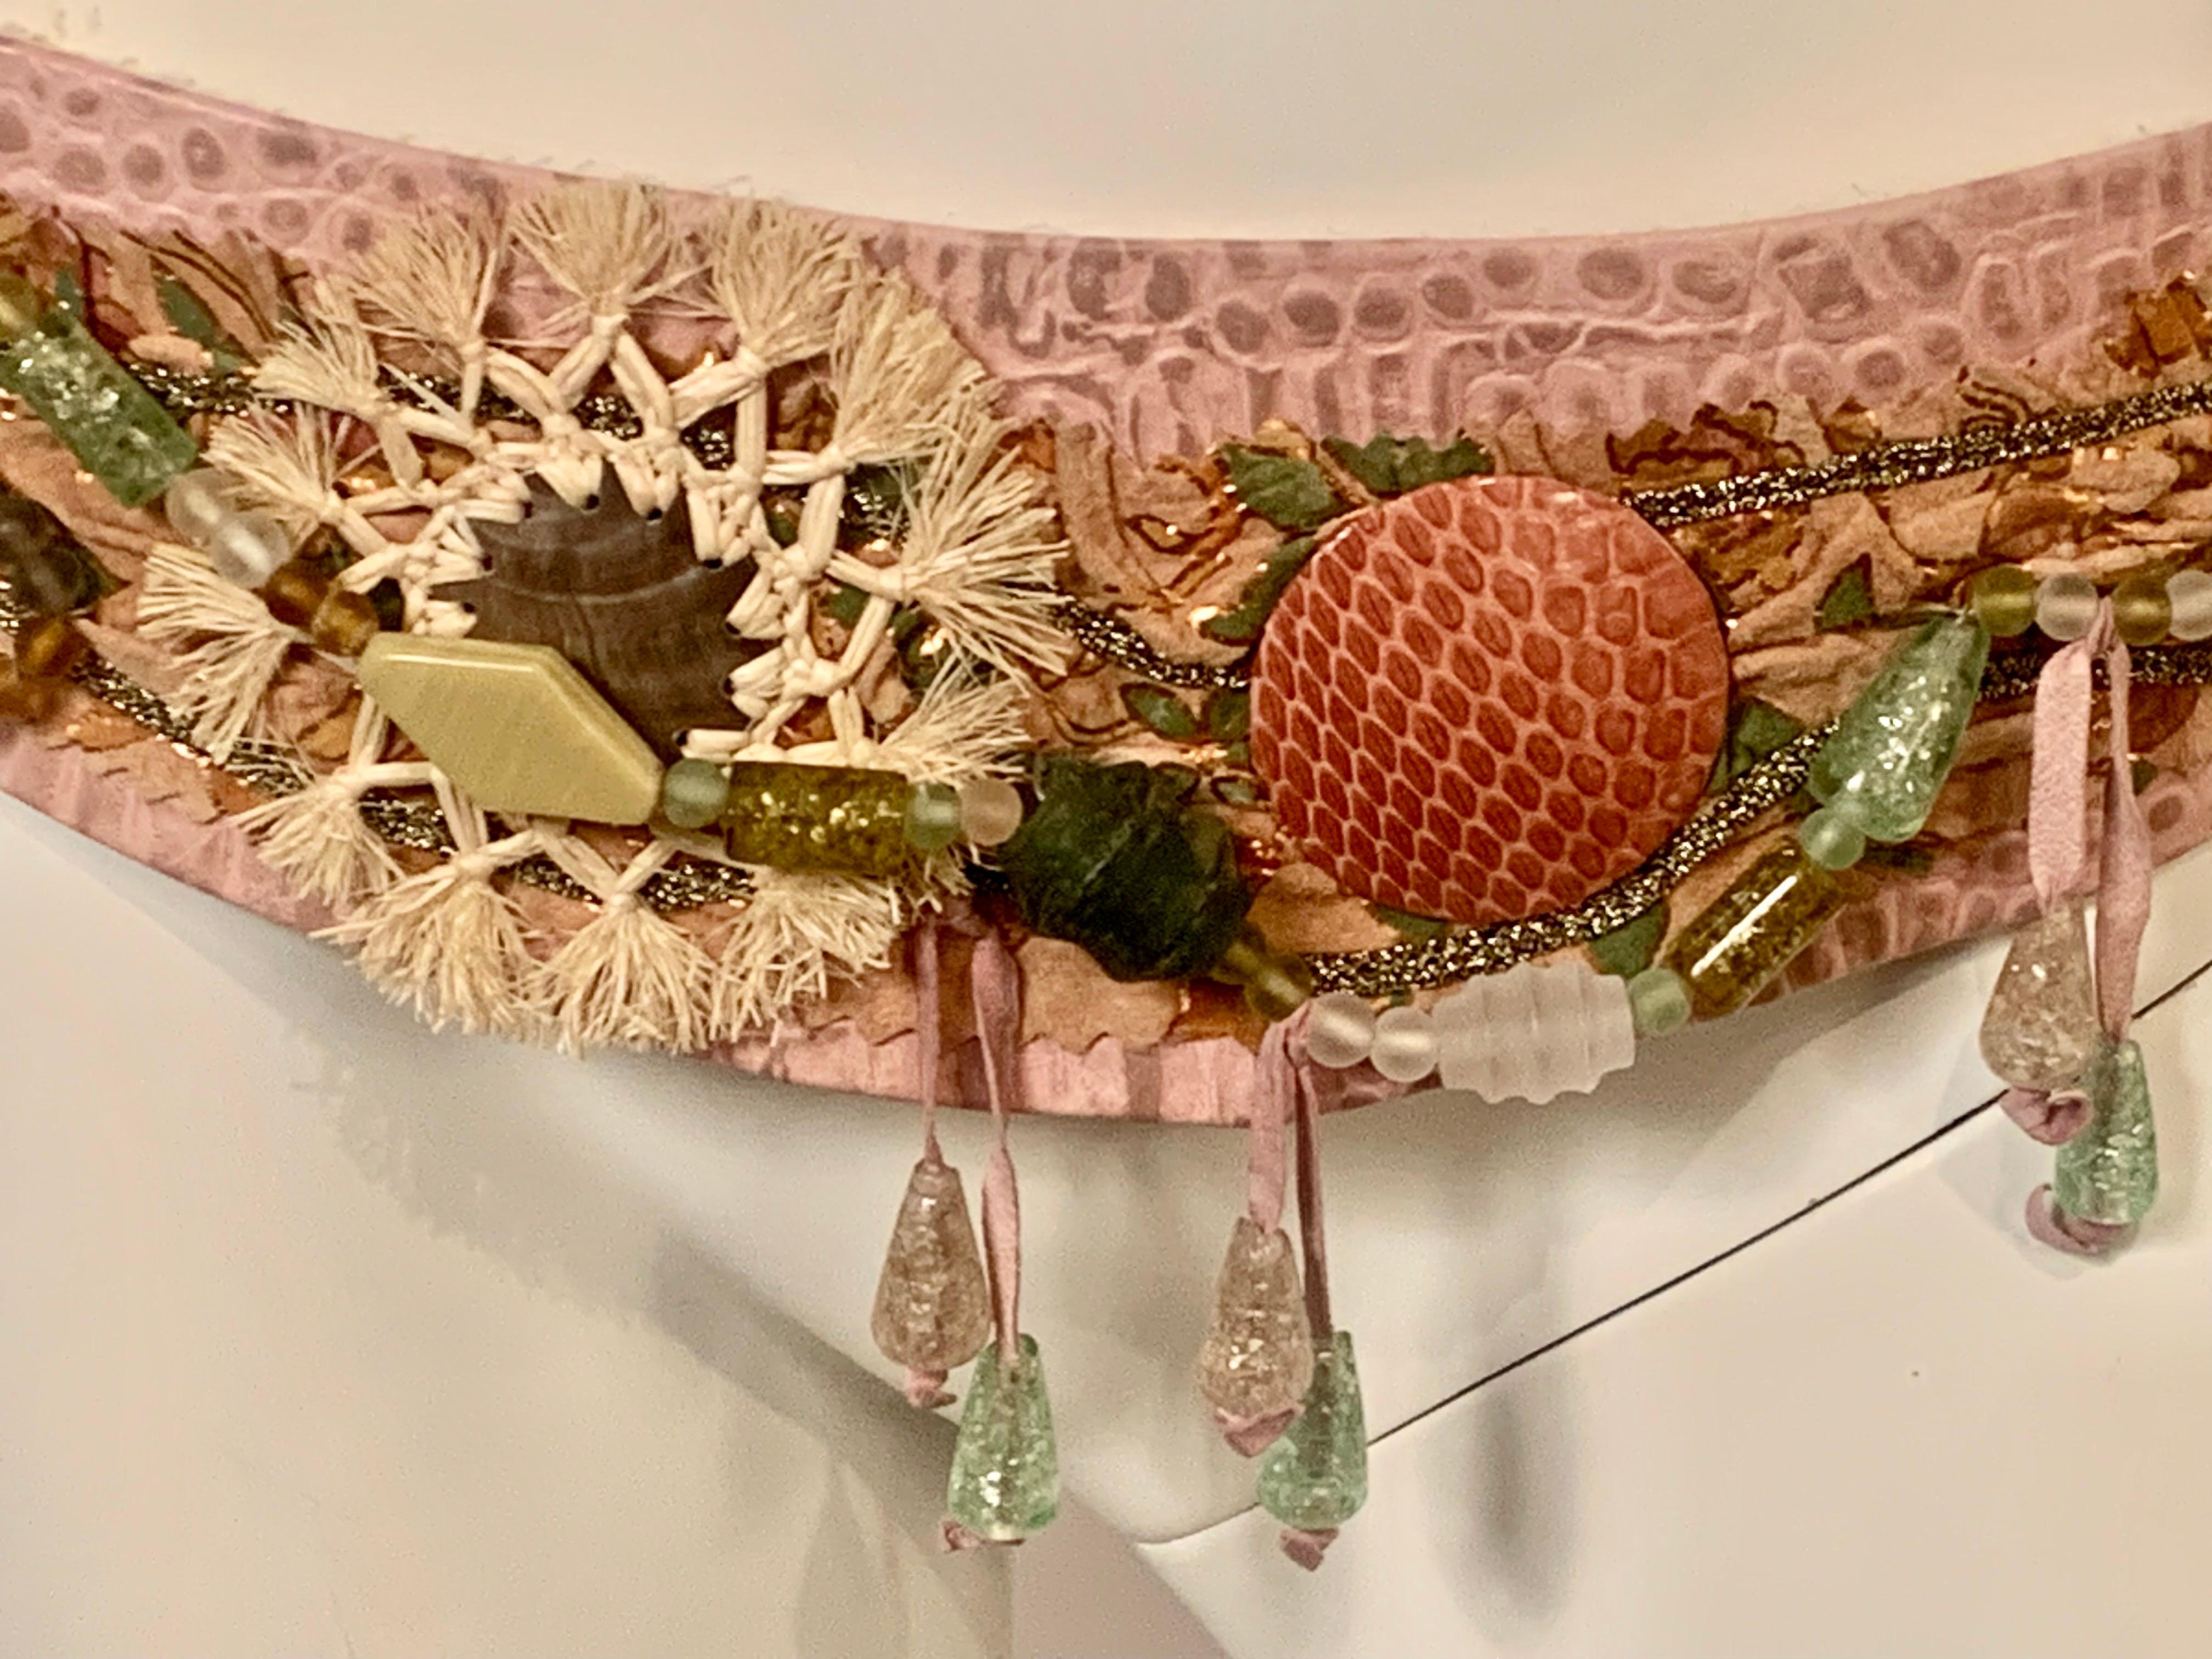 1970's Laise Adzer Pink Leather and Suede Belt  Beadwork and Straw Decoration In New Condition For Sale In New Hope, PA